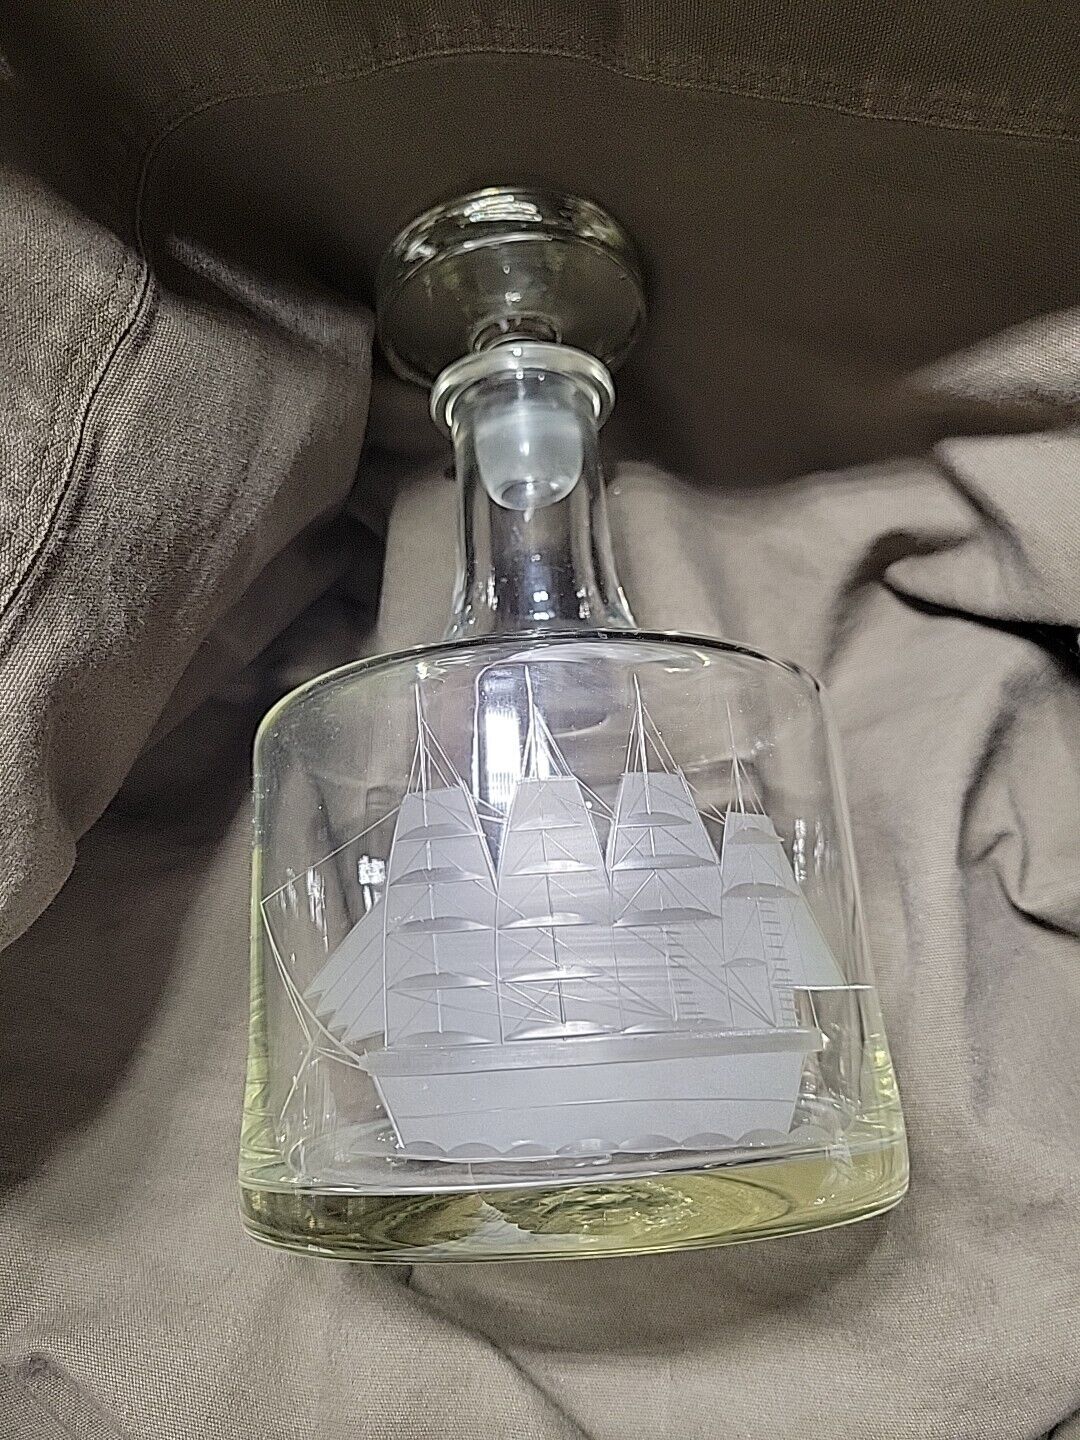 VTG Toscany Etched Clear Clipper Ship Whiskey Brandy Decanter And Stopper 